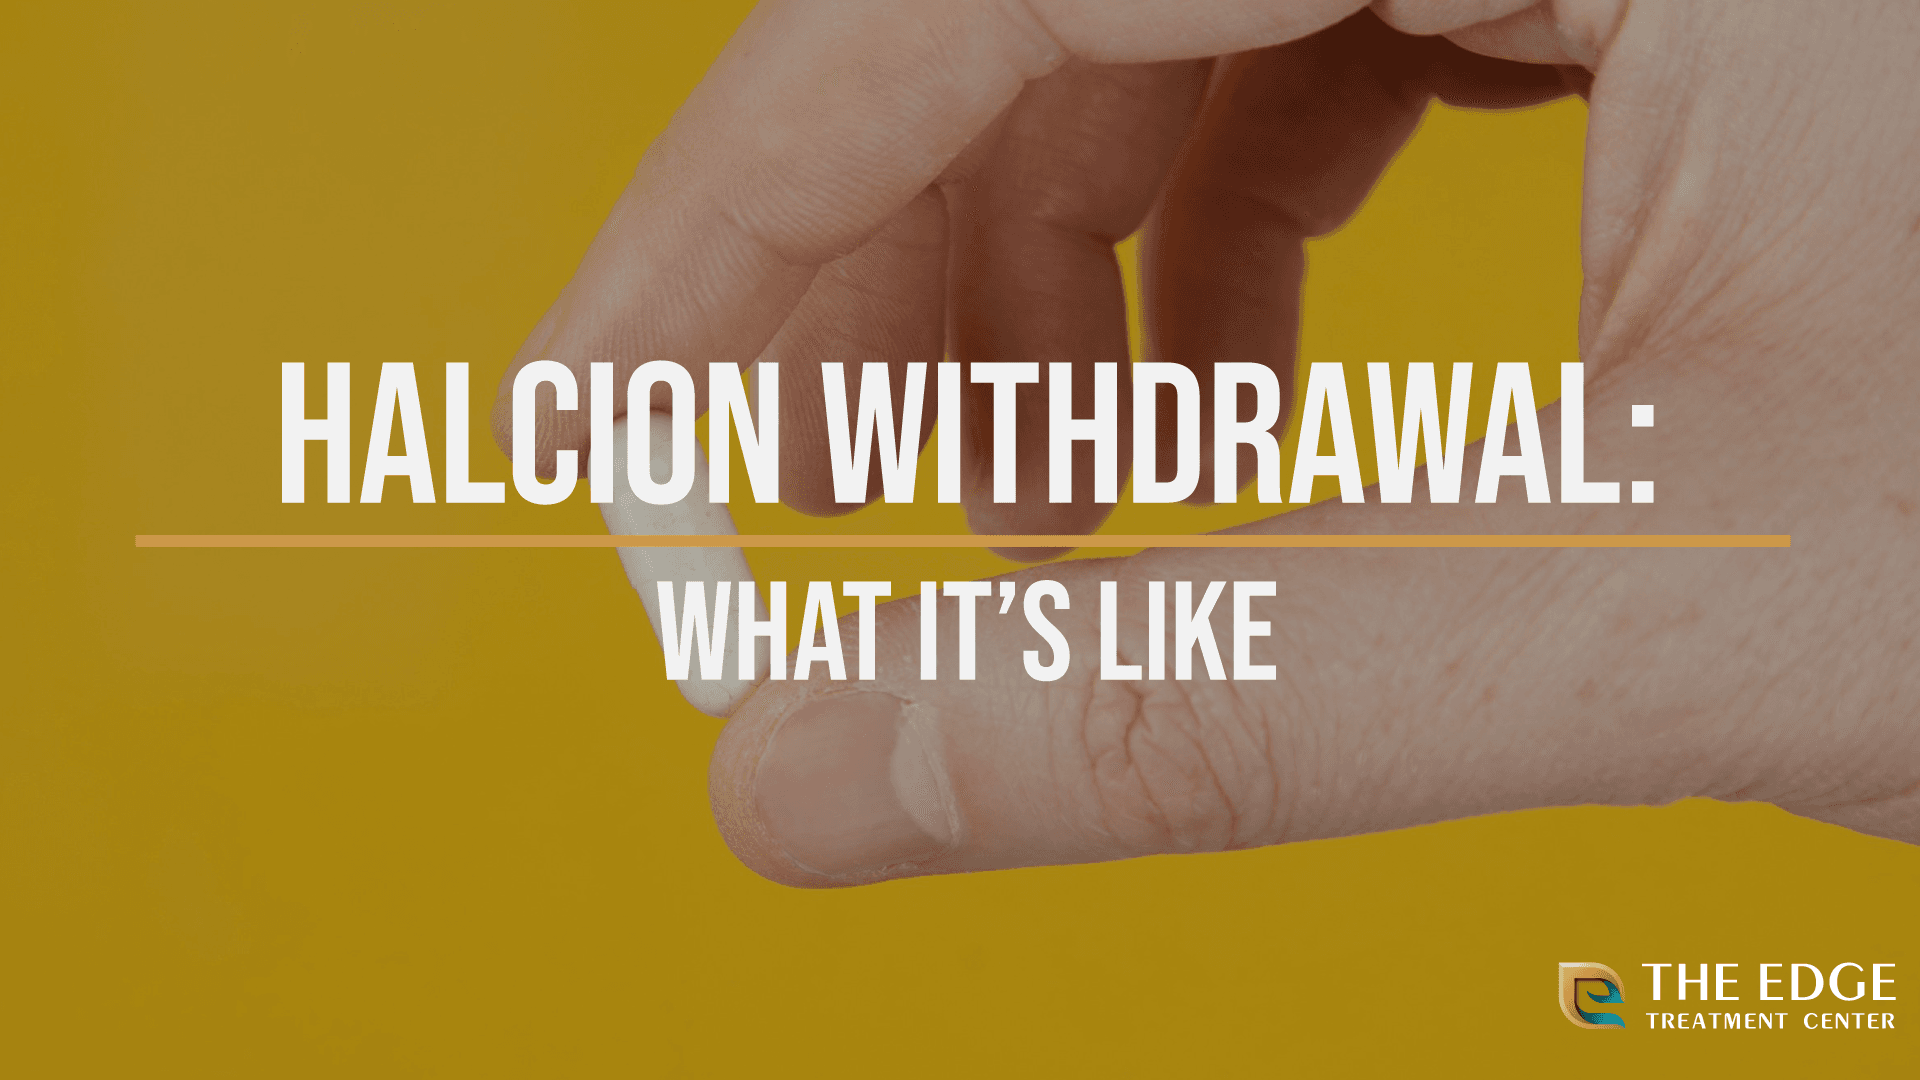 What is Halcion Withdrawal Like?